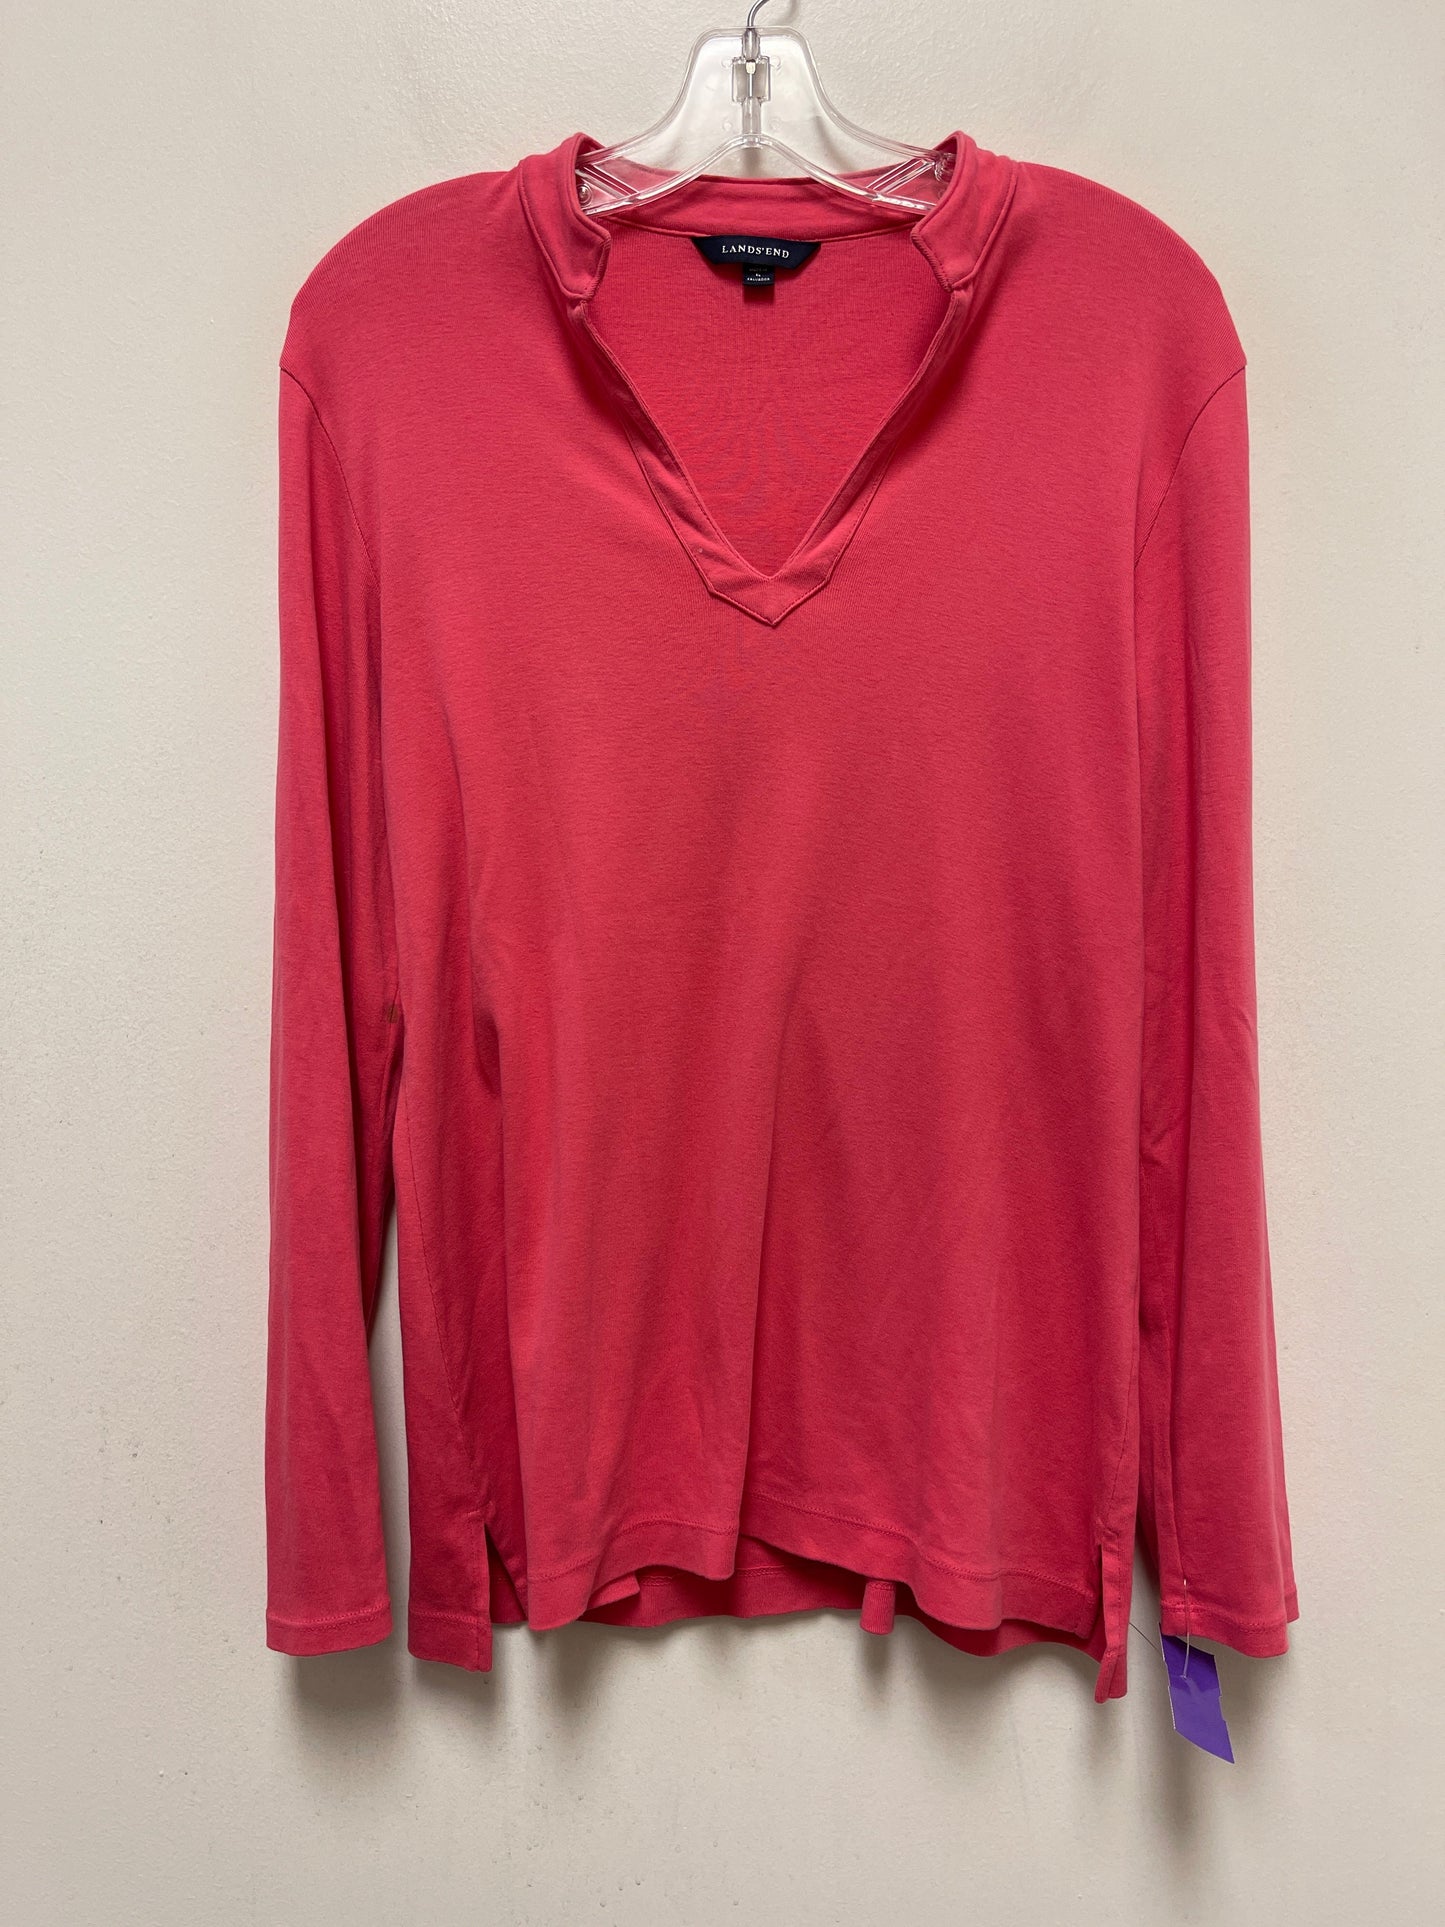 Pink Top Long Sleeve Basic Lands End, Size S